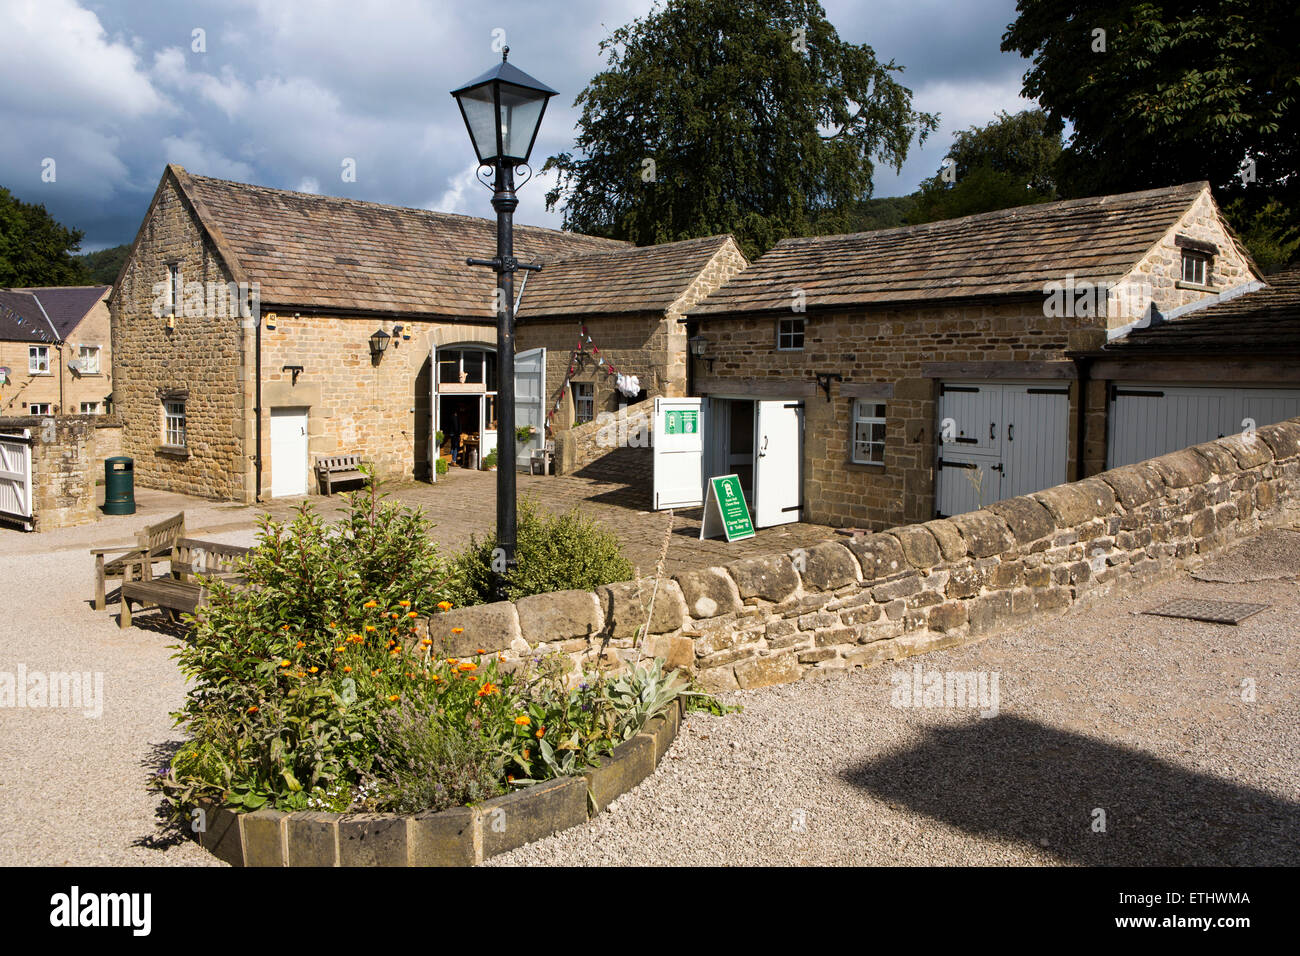 UK, England, Derbyshire, Eyam, Hall courtyard, old stone barns used as craft workshops, shops and offices Stock Photo